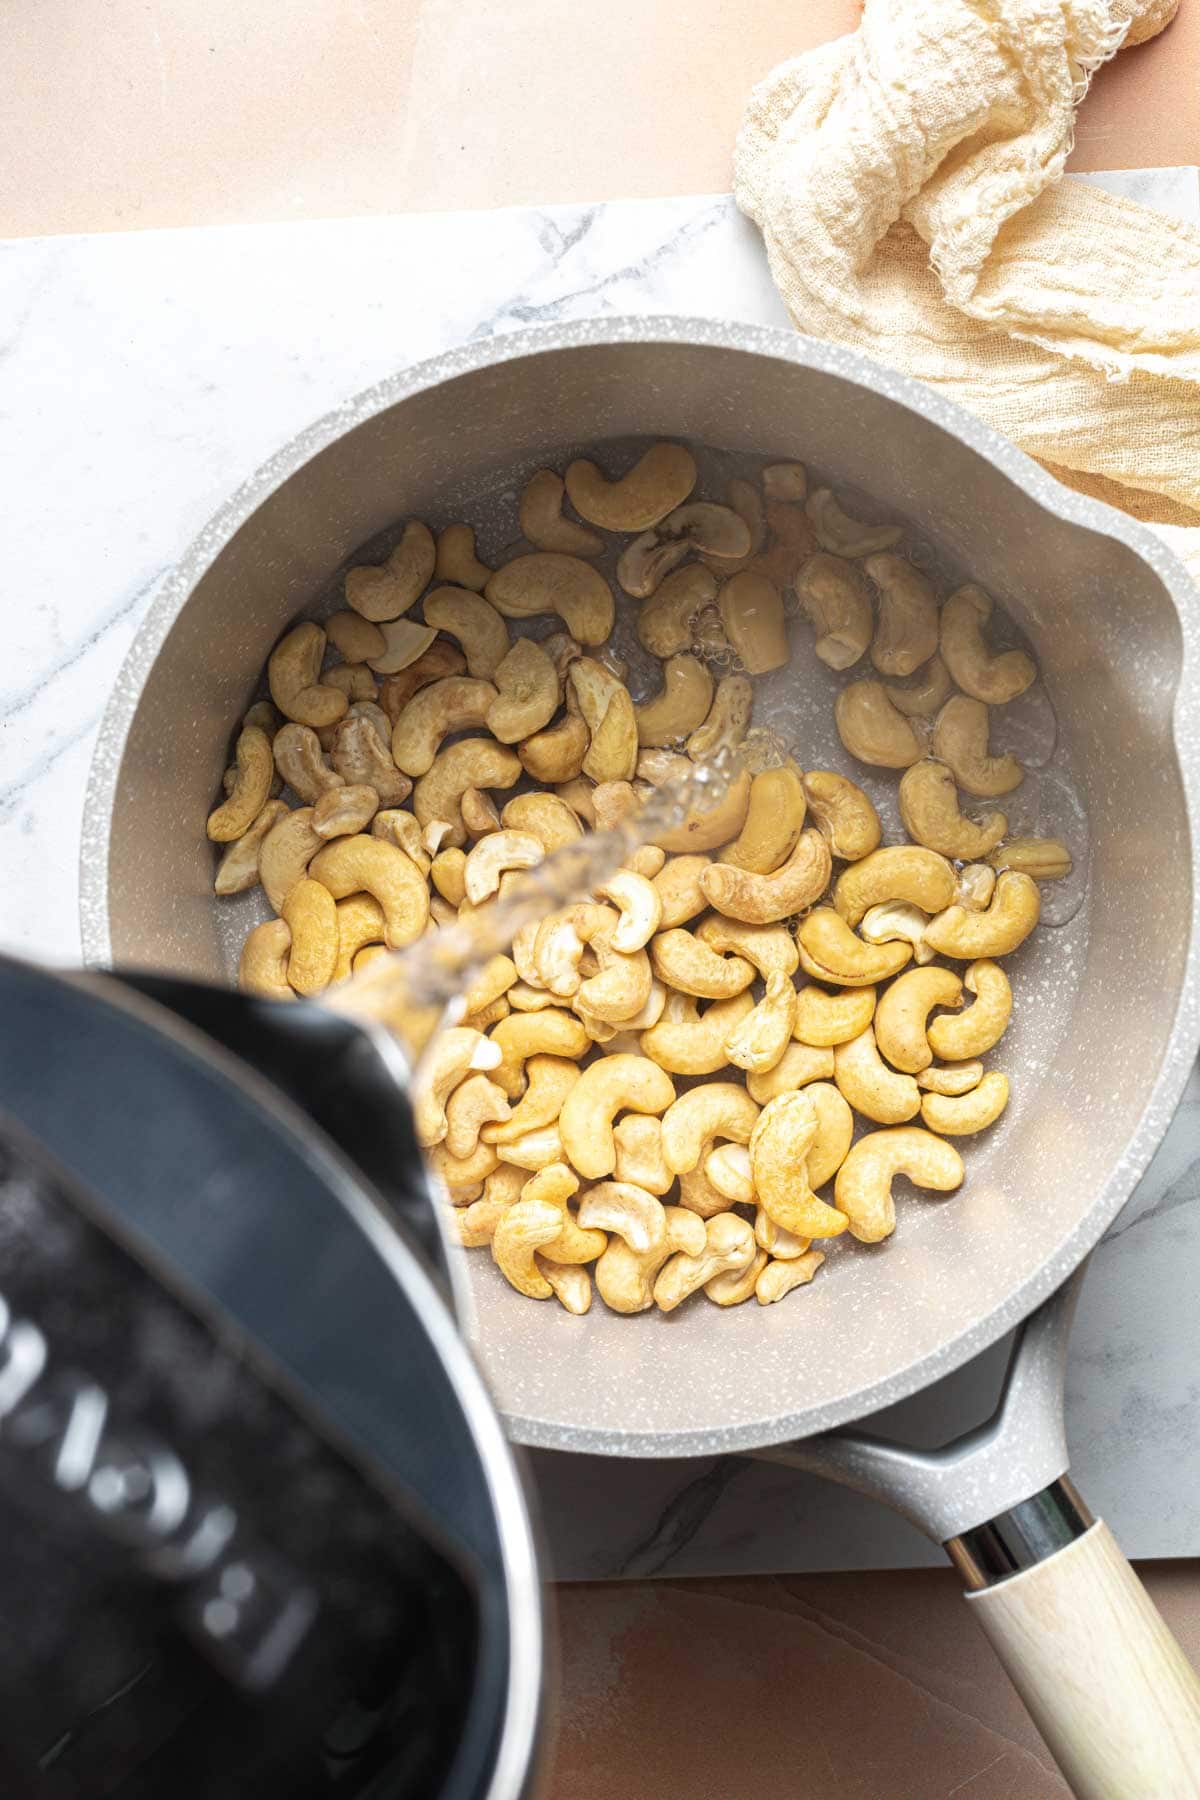 Boiling hot water being poured into a pan filled with cashews.